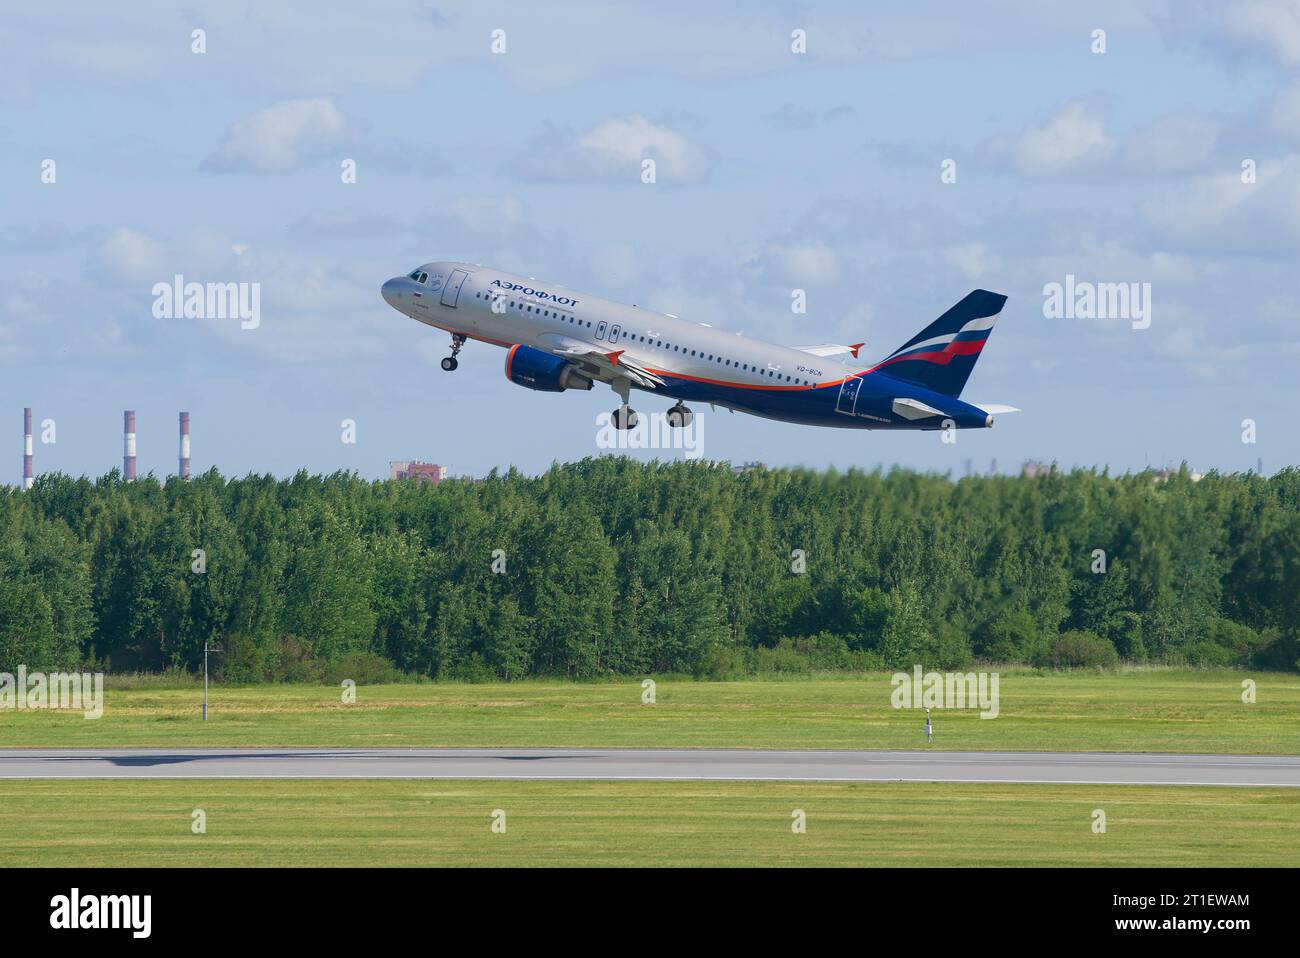 ST. PETERSBURG, RUSSIA - JUNE 20, 2018: Take-off of the Airbus A320-214 (VQ-BCN) of Aeroflot airline on Pulkovo Airport Stock Photo